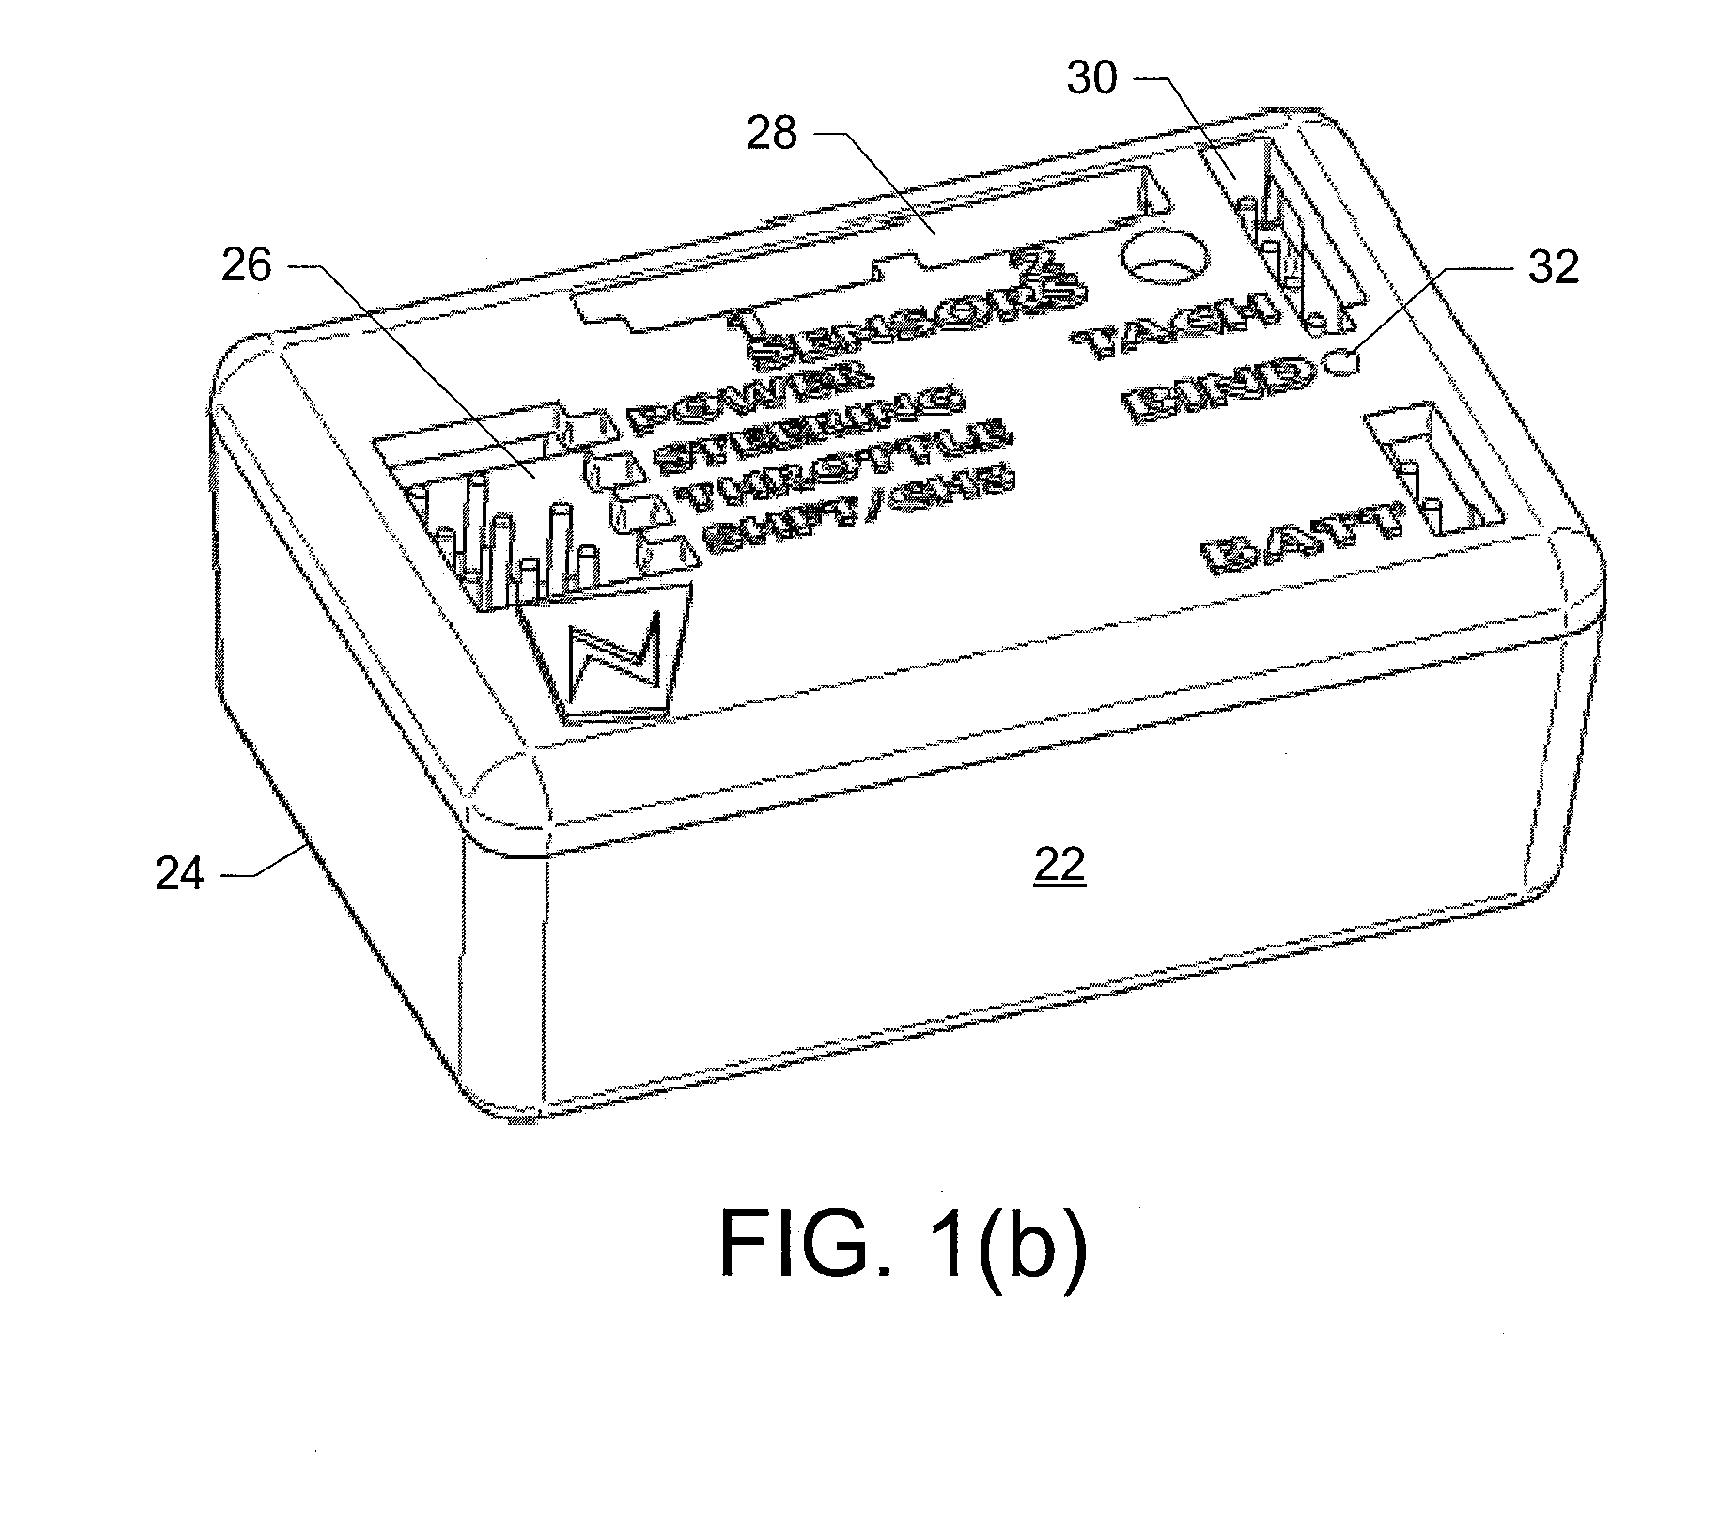 Communications systems and methods for remotely controlled vehicles